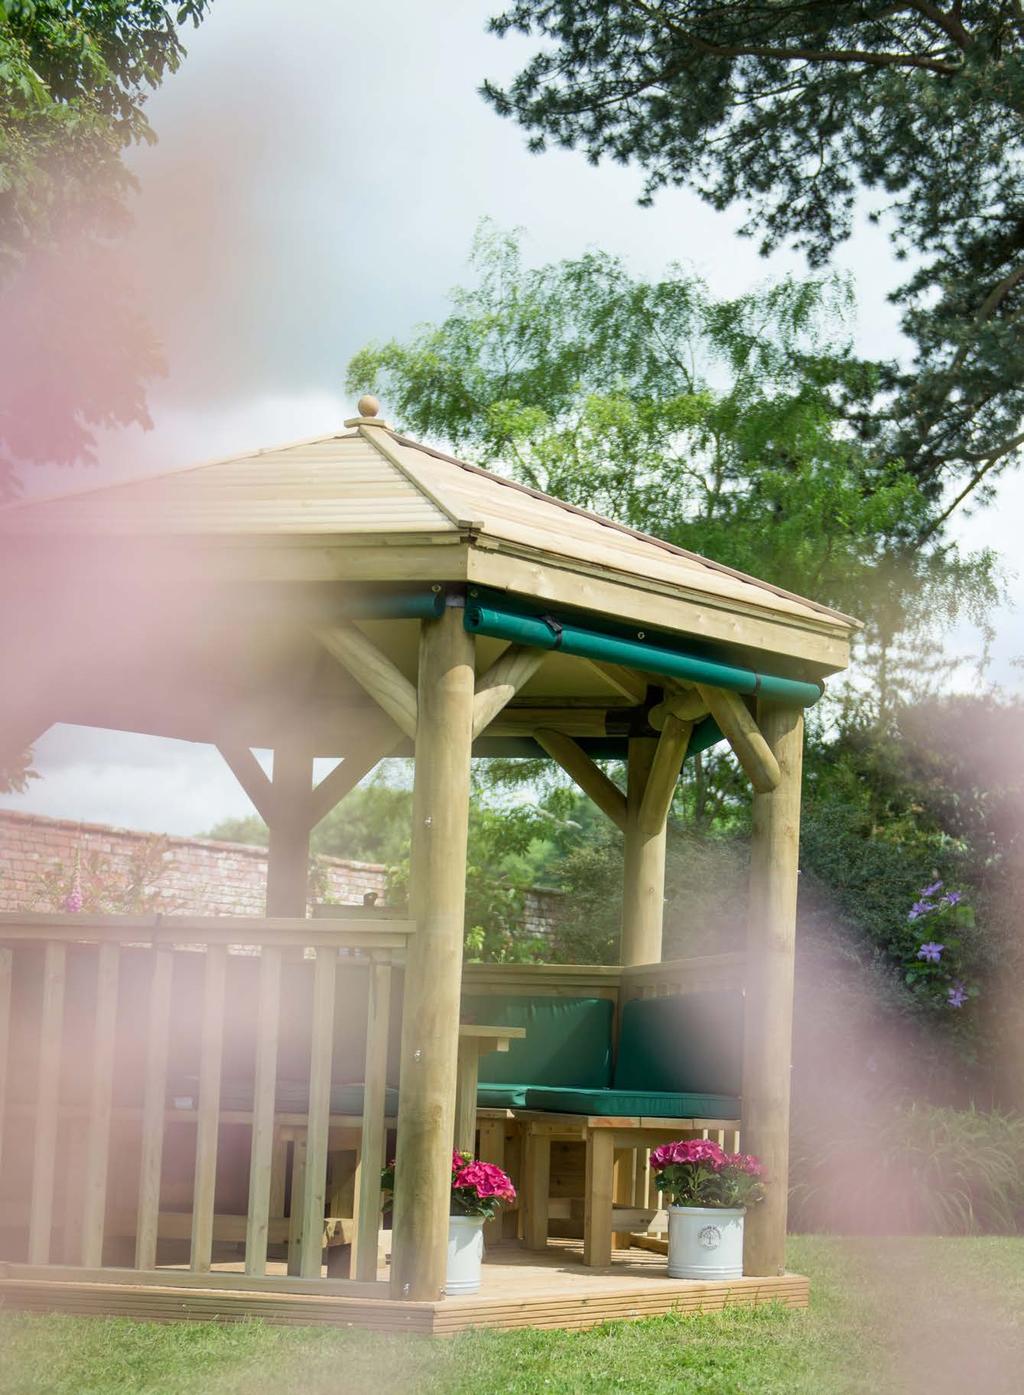 Garden Gazebos Hexagonal With a choice of 4 sizes, from the